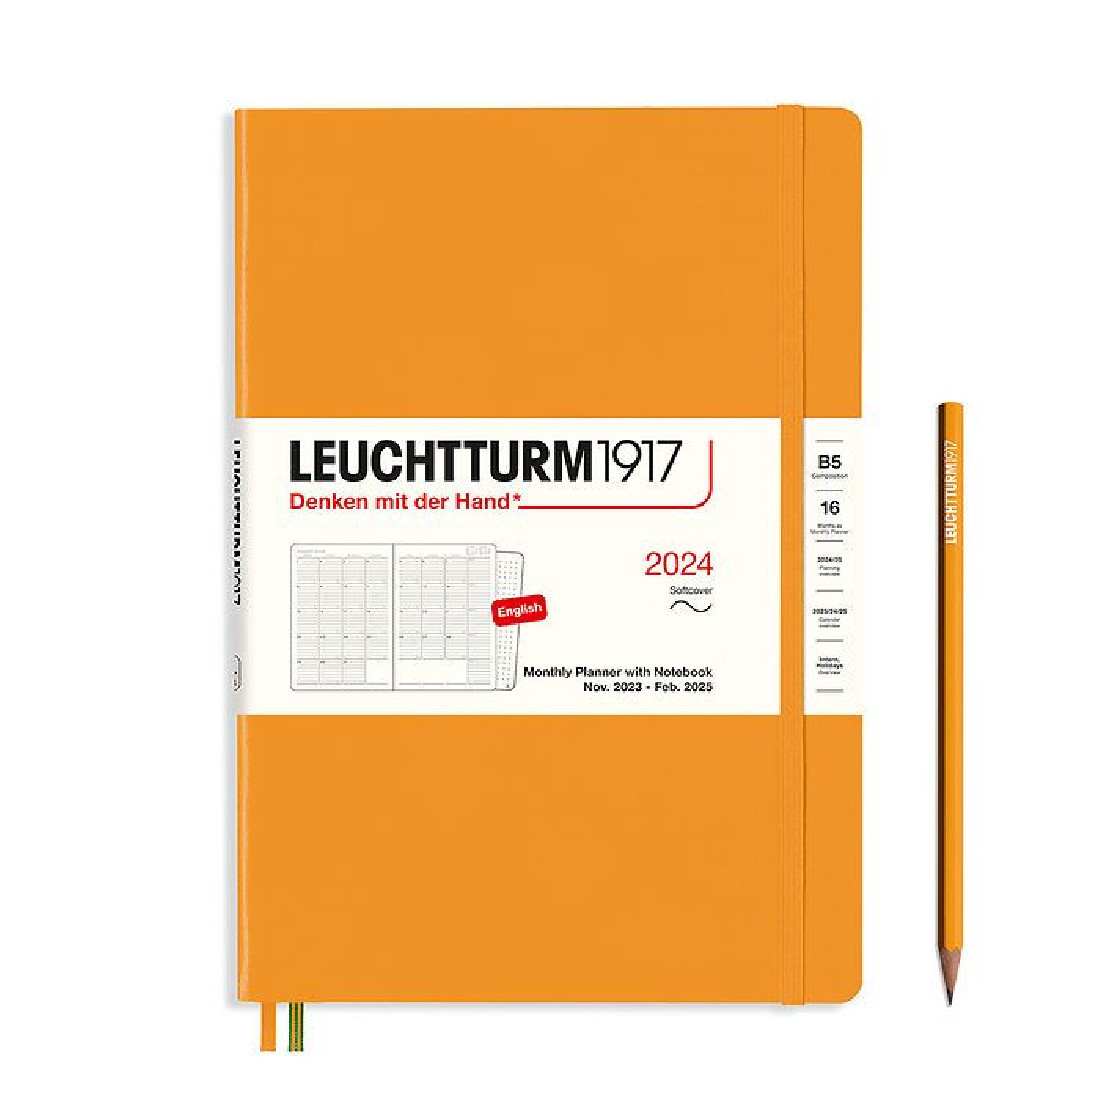 Leuchtturm 1917 Monthly Planner and Notebook 2024 Rising Sun Composition B5 Soft Cover